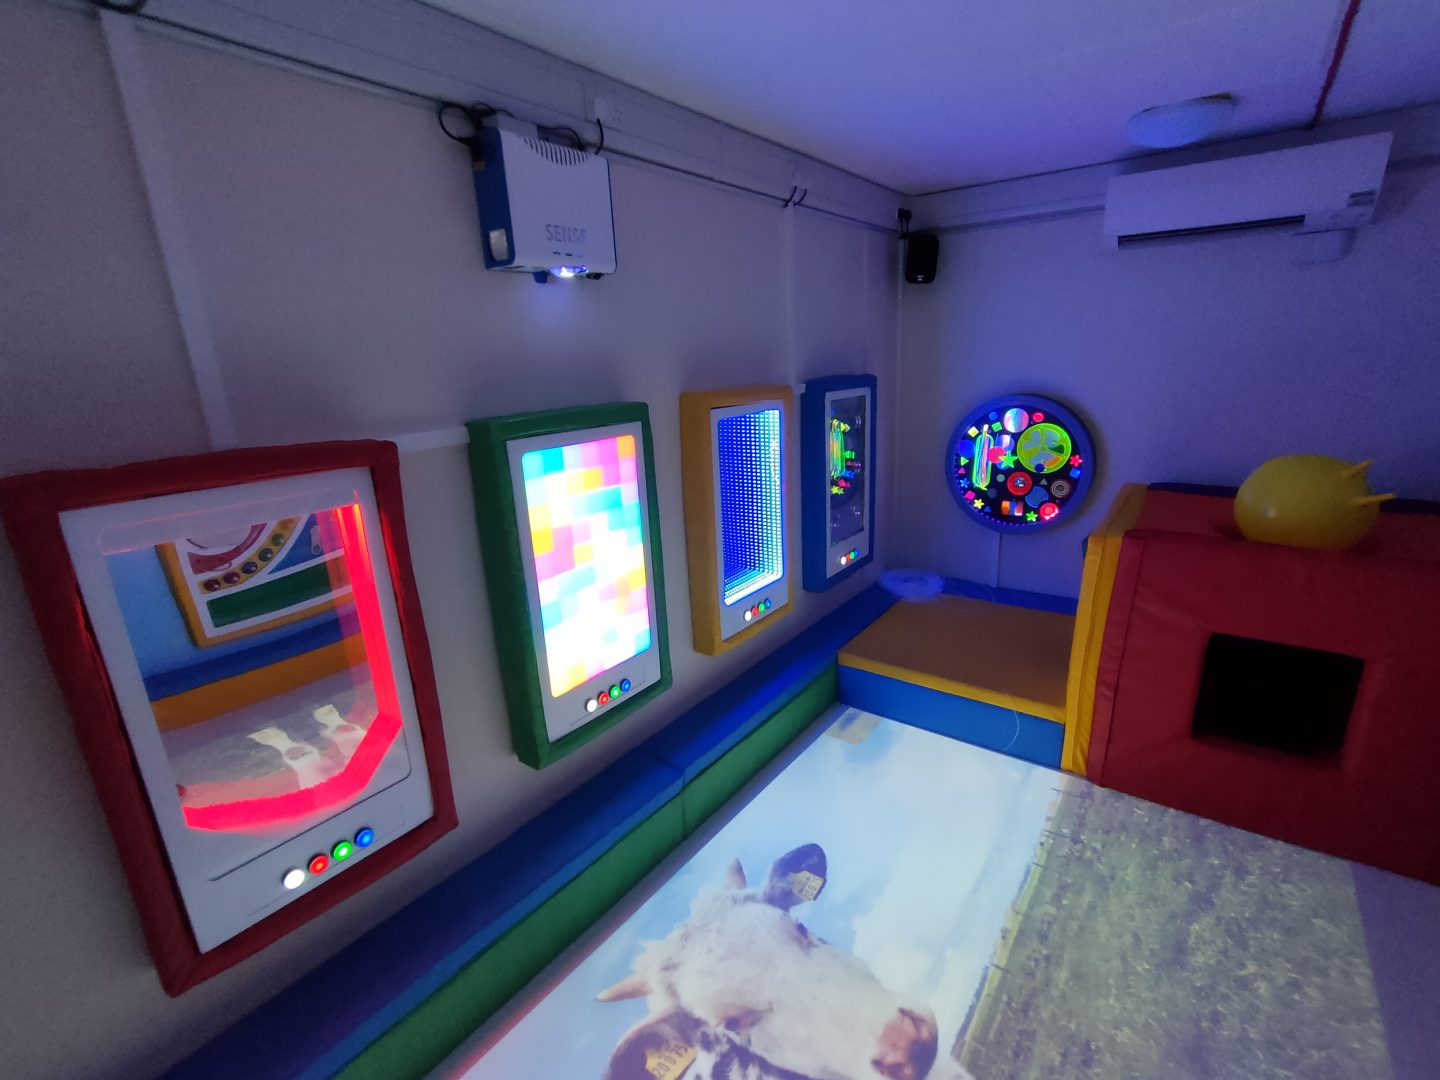 Sensory room featuring interactive wall panels, interactive floor and a soft padded den